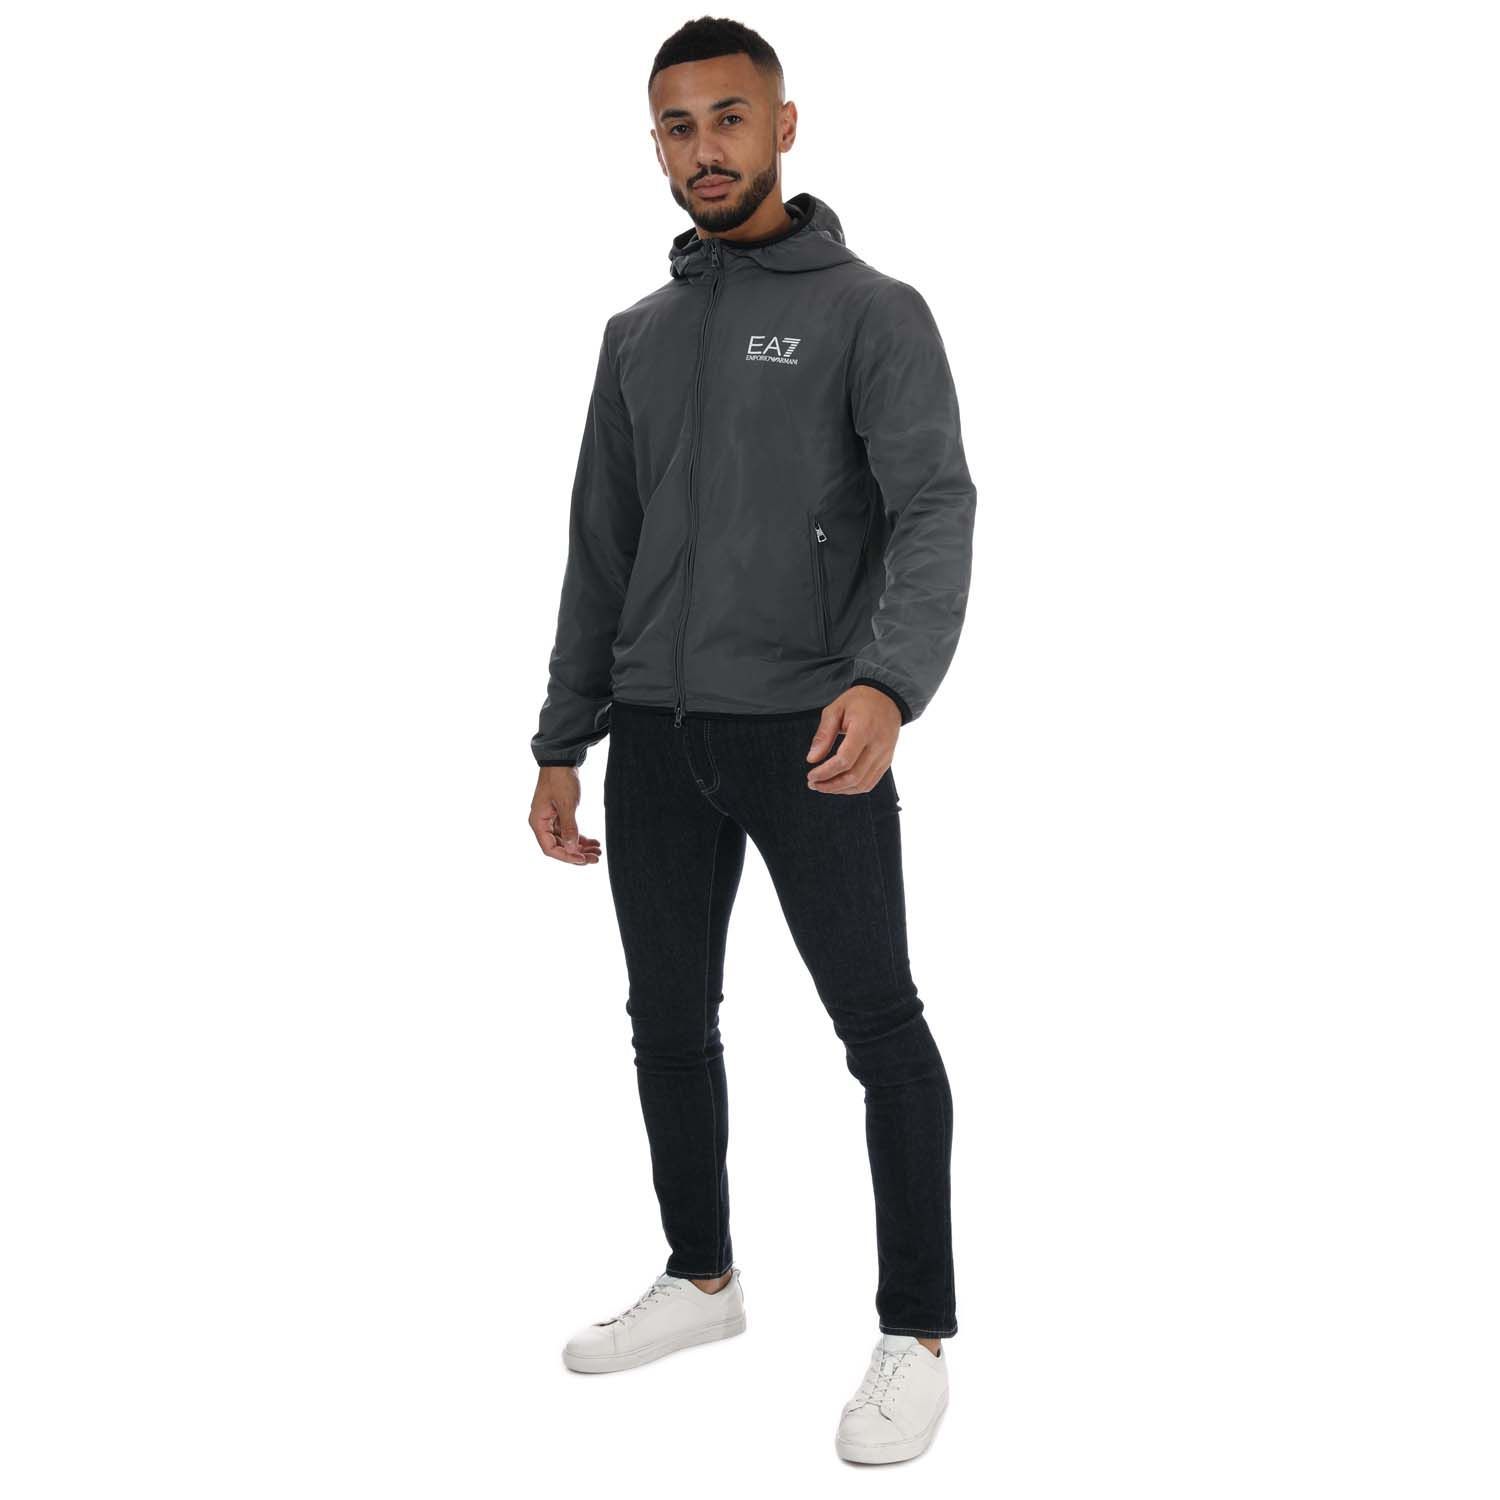 Mens Emporio Armani EA7 Fundamental Sporty Blouson Jacket in grey.- Attached drawstring hood.- Long sleeves.- Full zip fastening.- Two zipped front pockets.- Elasticated cuffs.- Contrasting EA7 logo on the chest.- 100% Polyester.- Ref: 8NPB04NN7Z1977